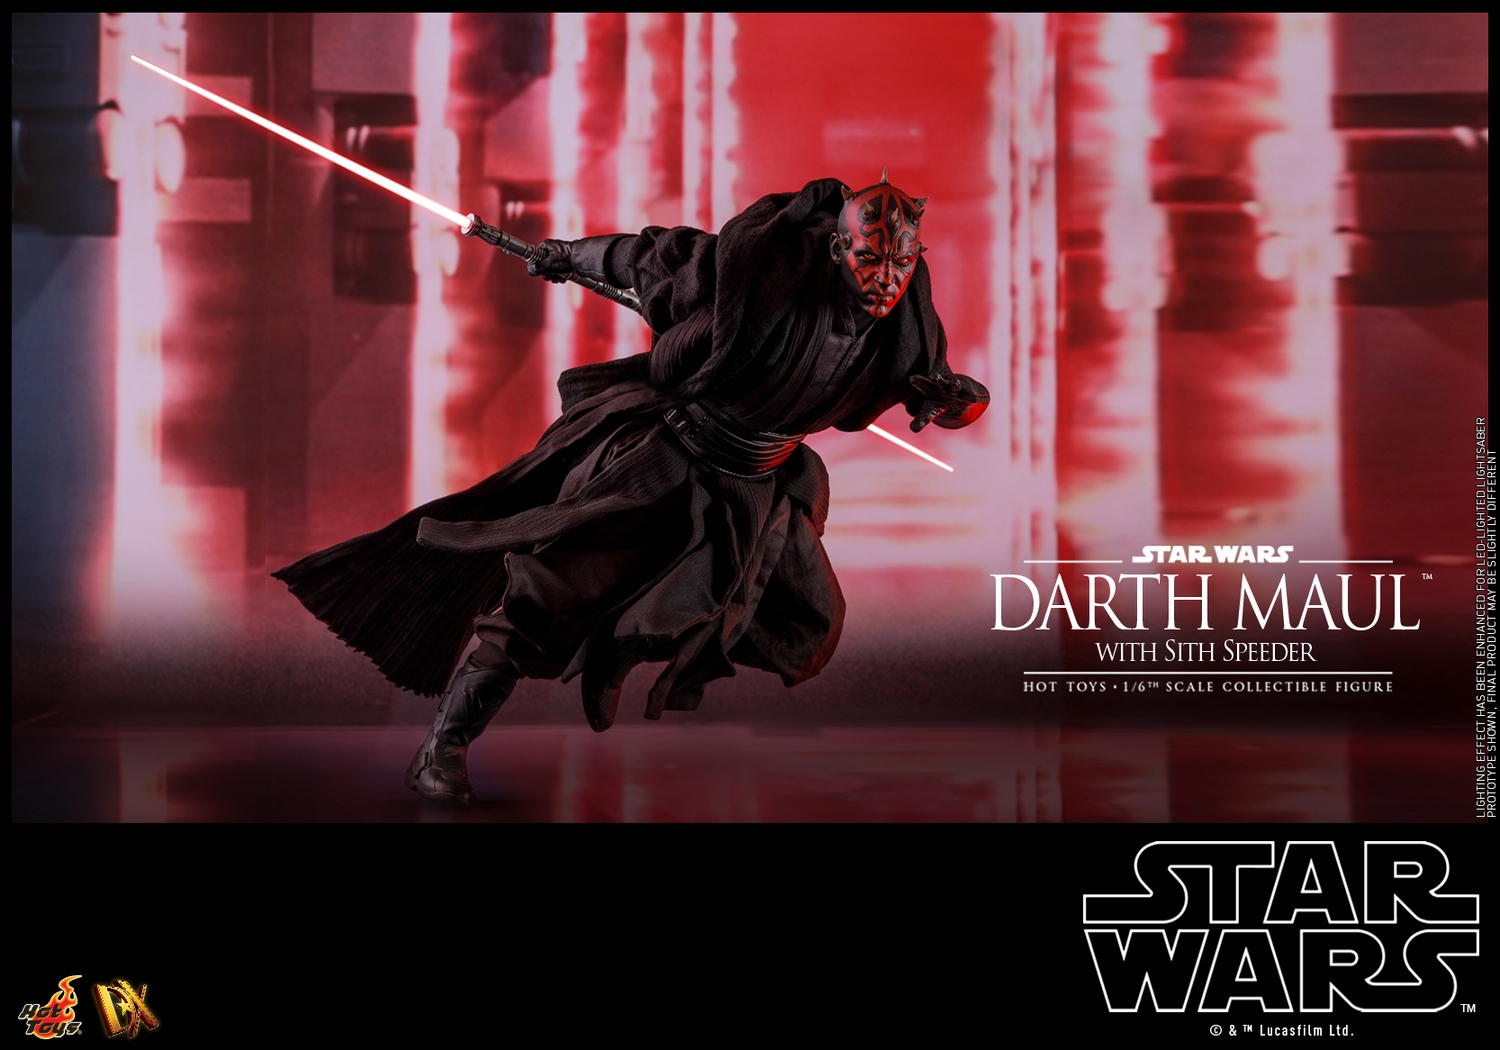 hot-toys-star-wars-1-6-darth-maul-with-sith-speeder-dx17-collectible-figure-015.jpg